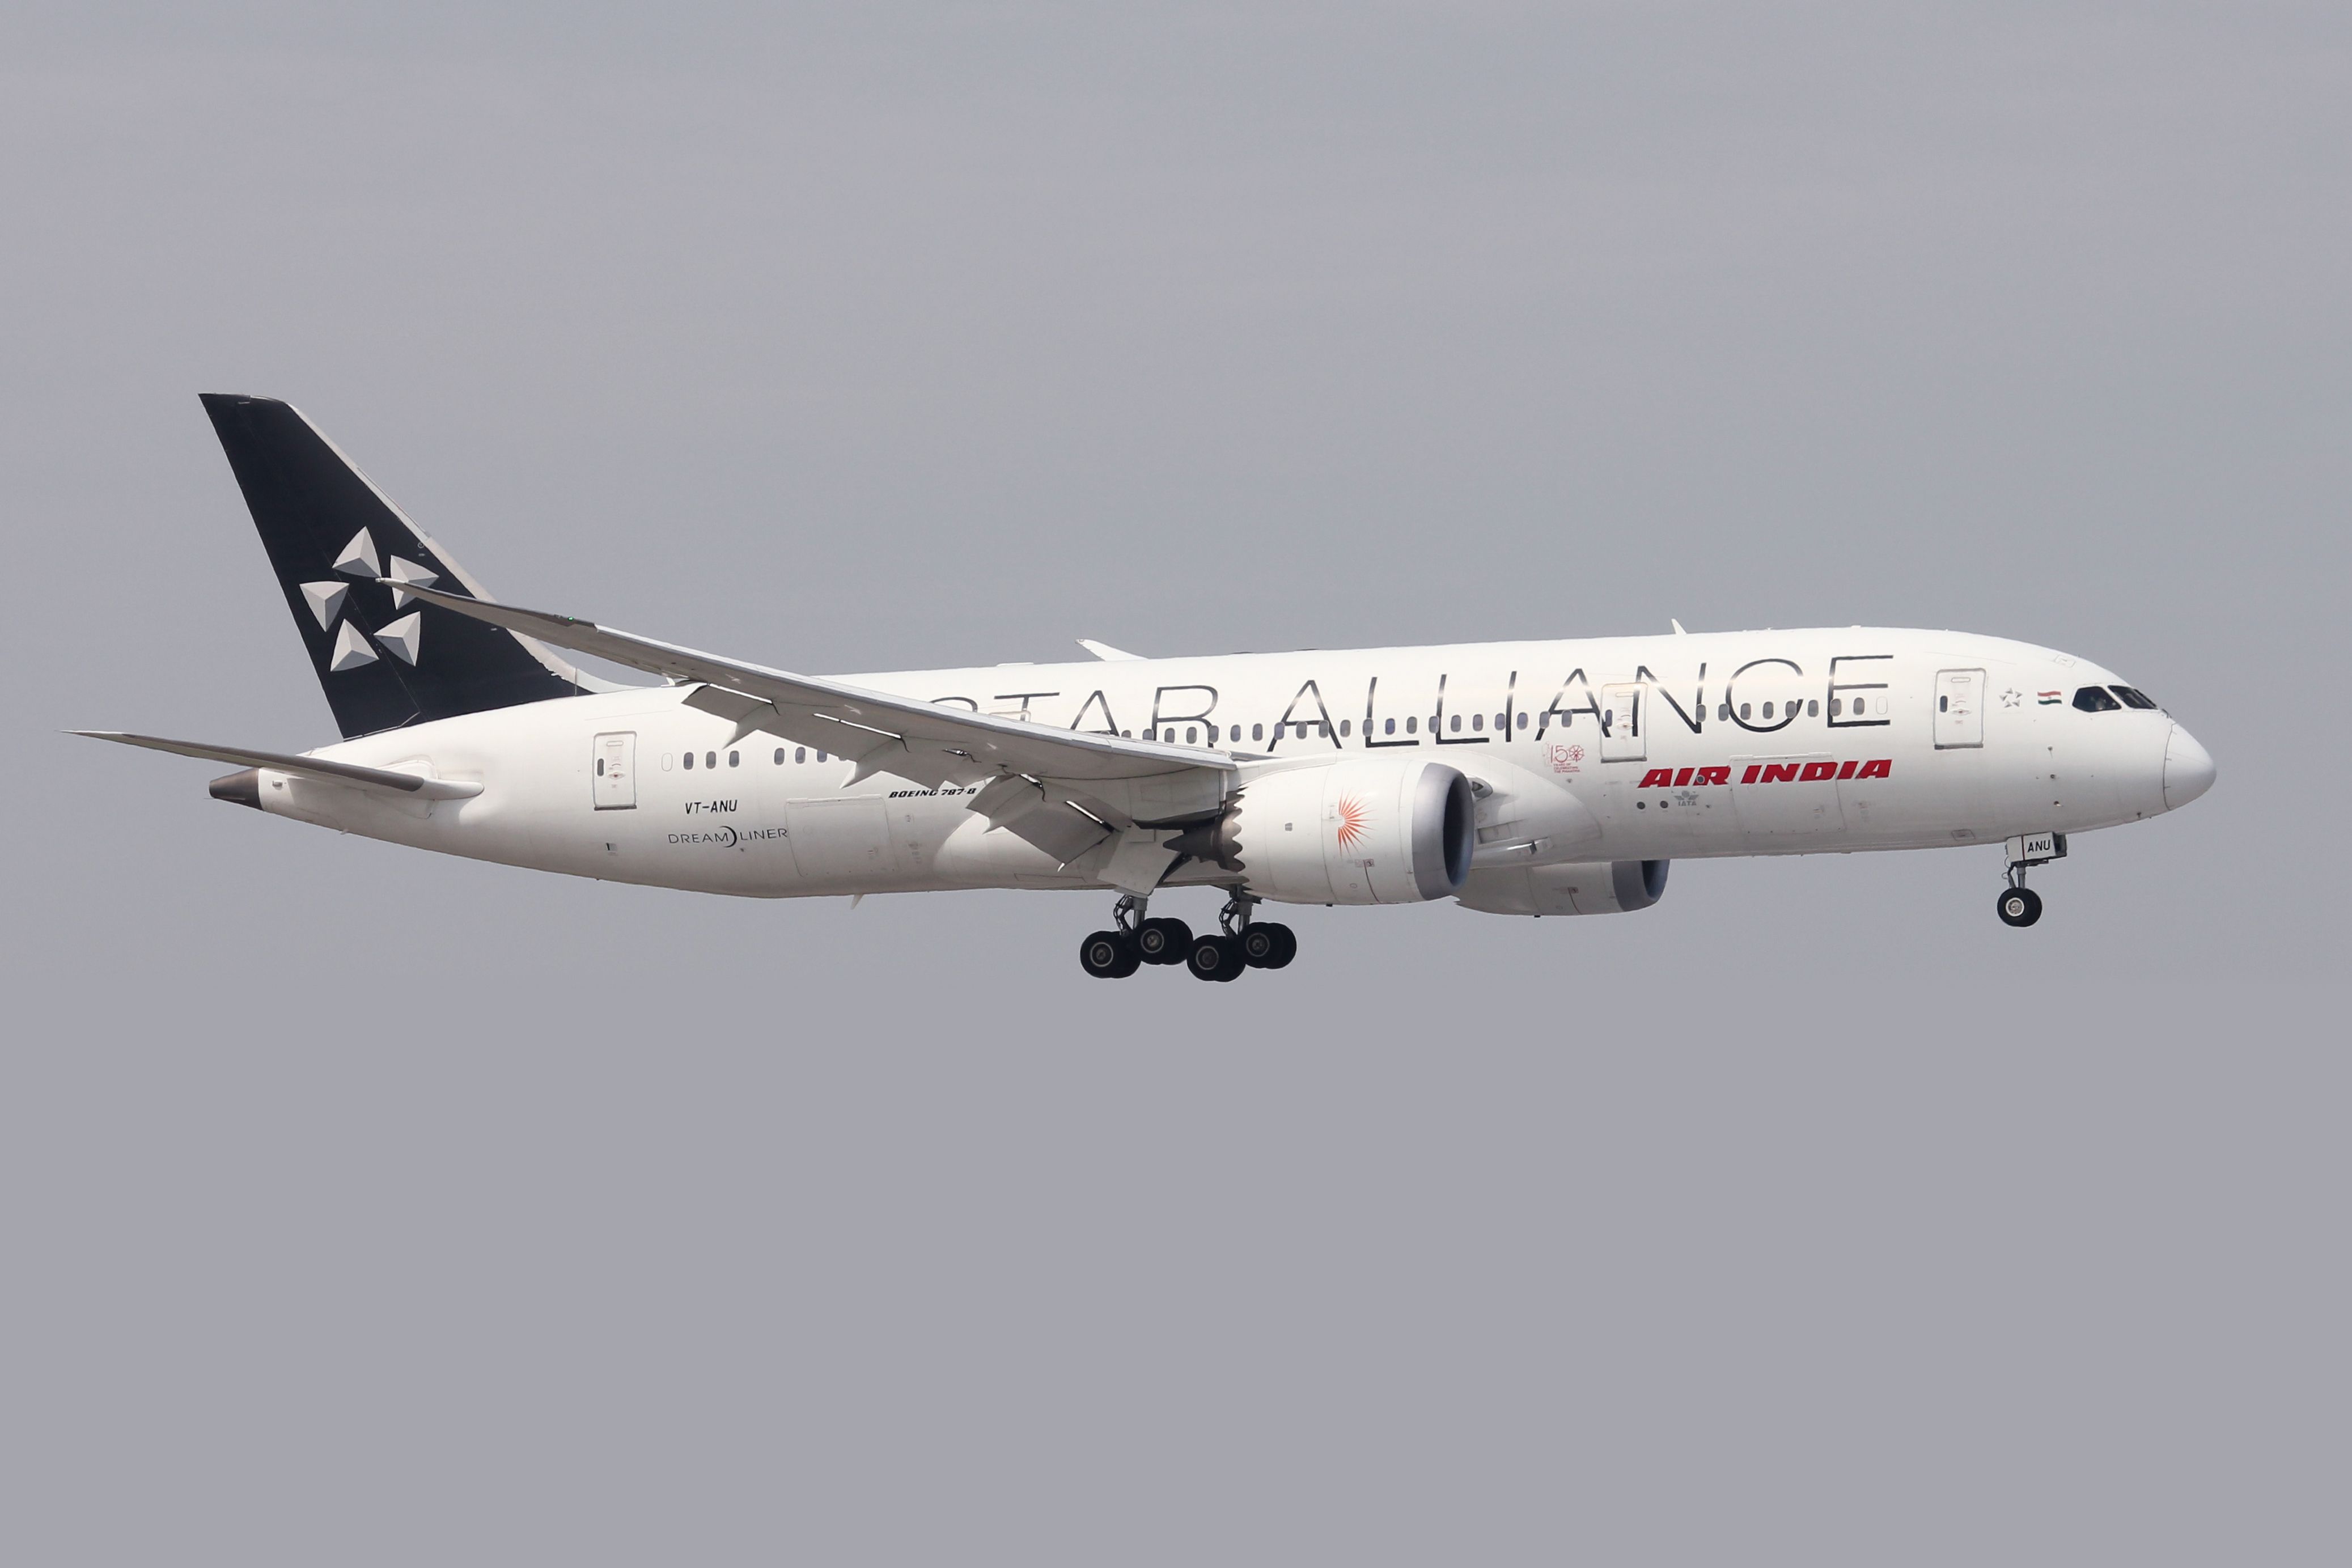 Air India 787 Star Alliance livery